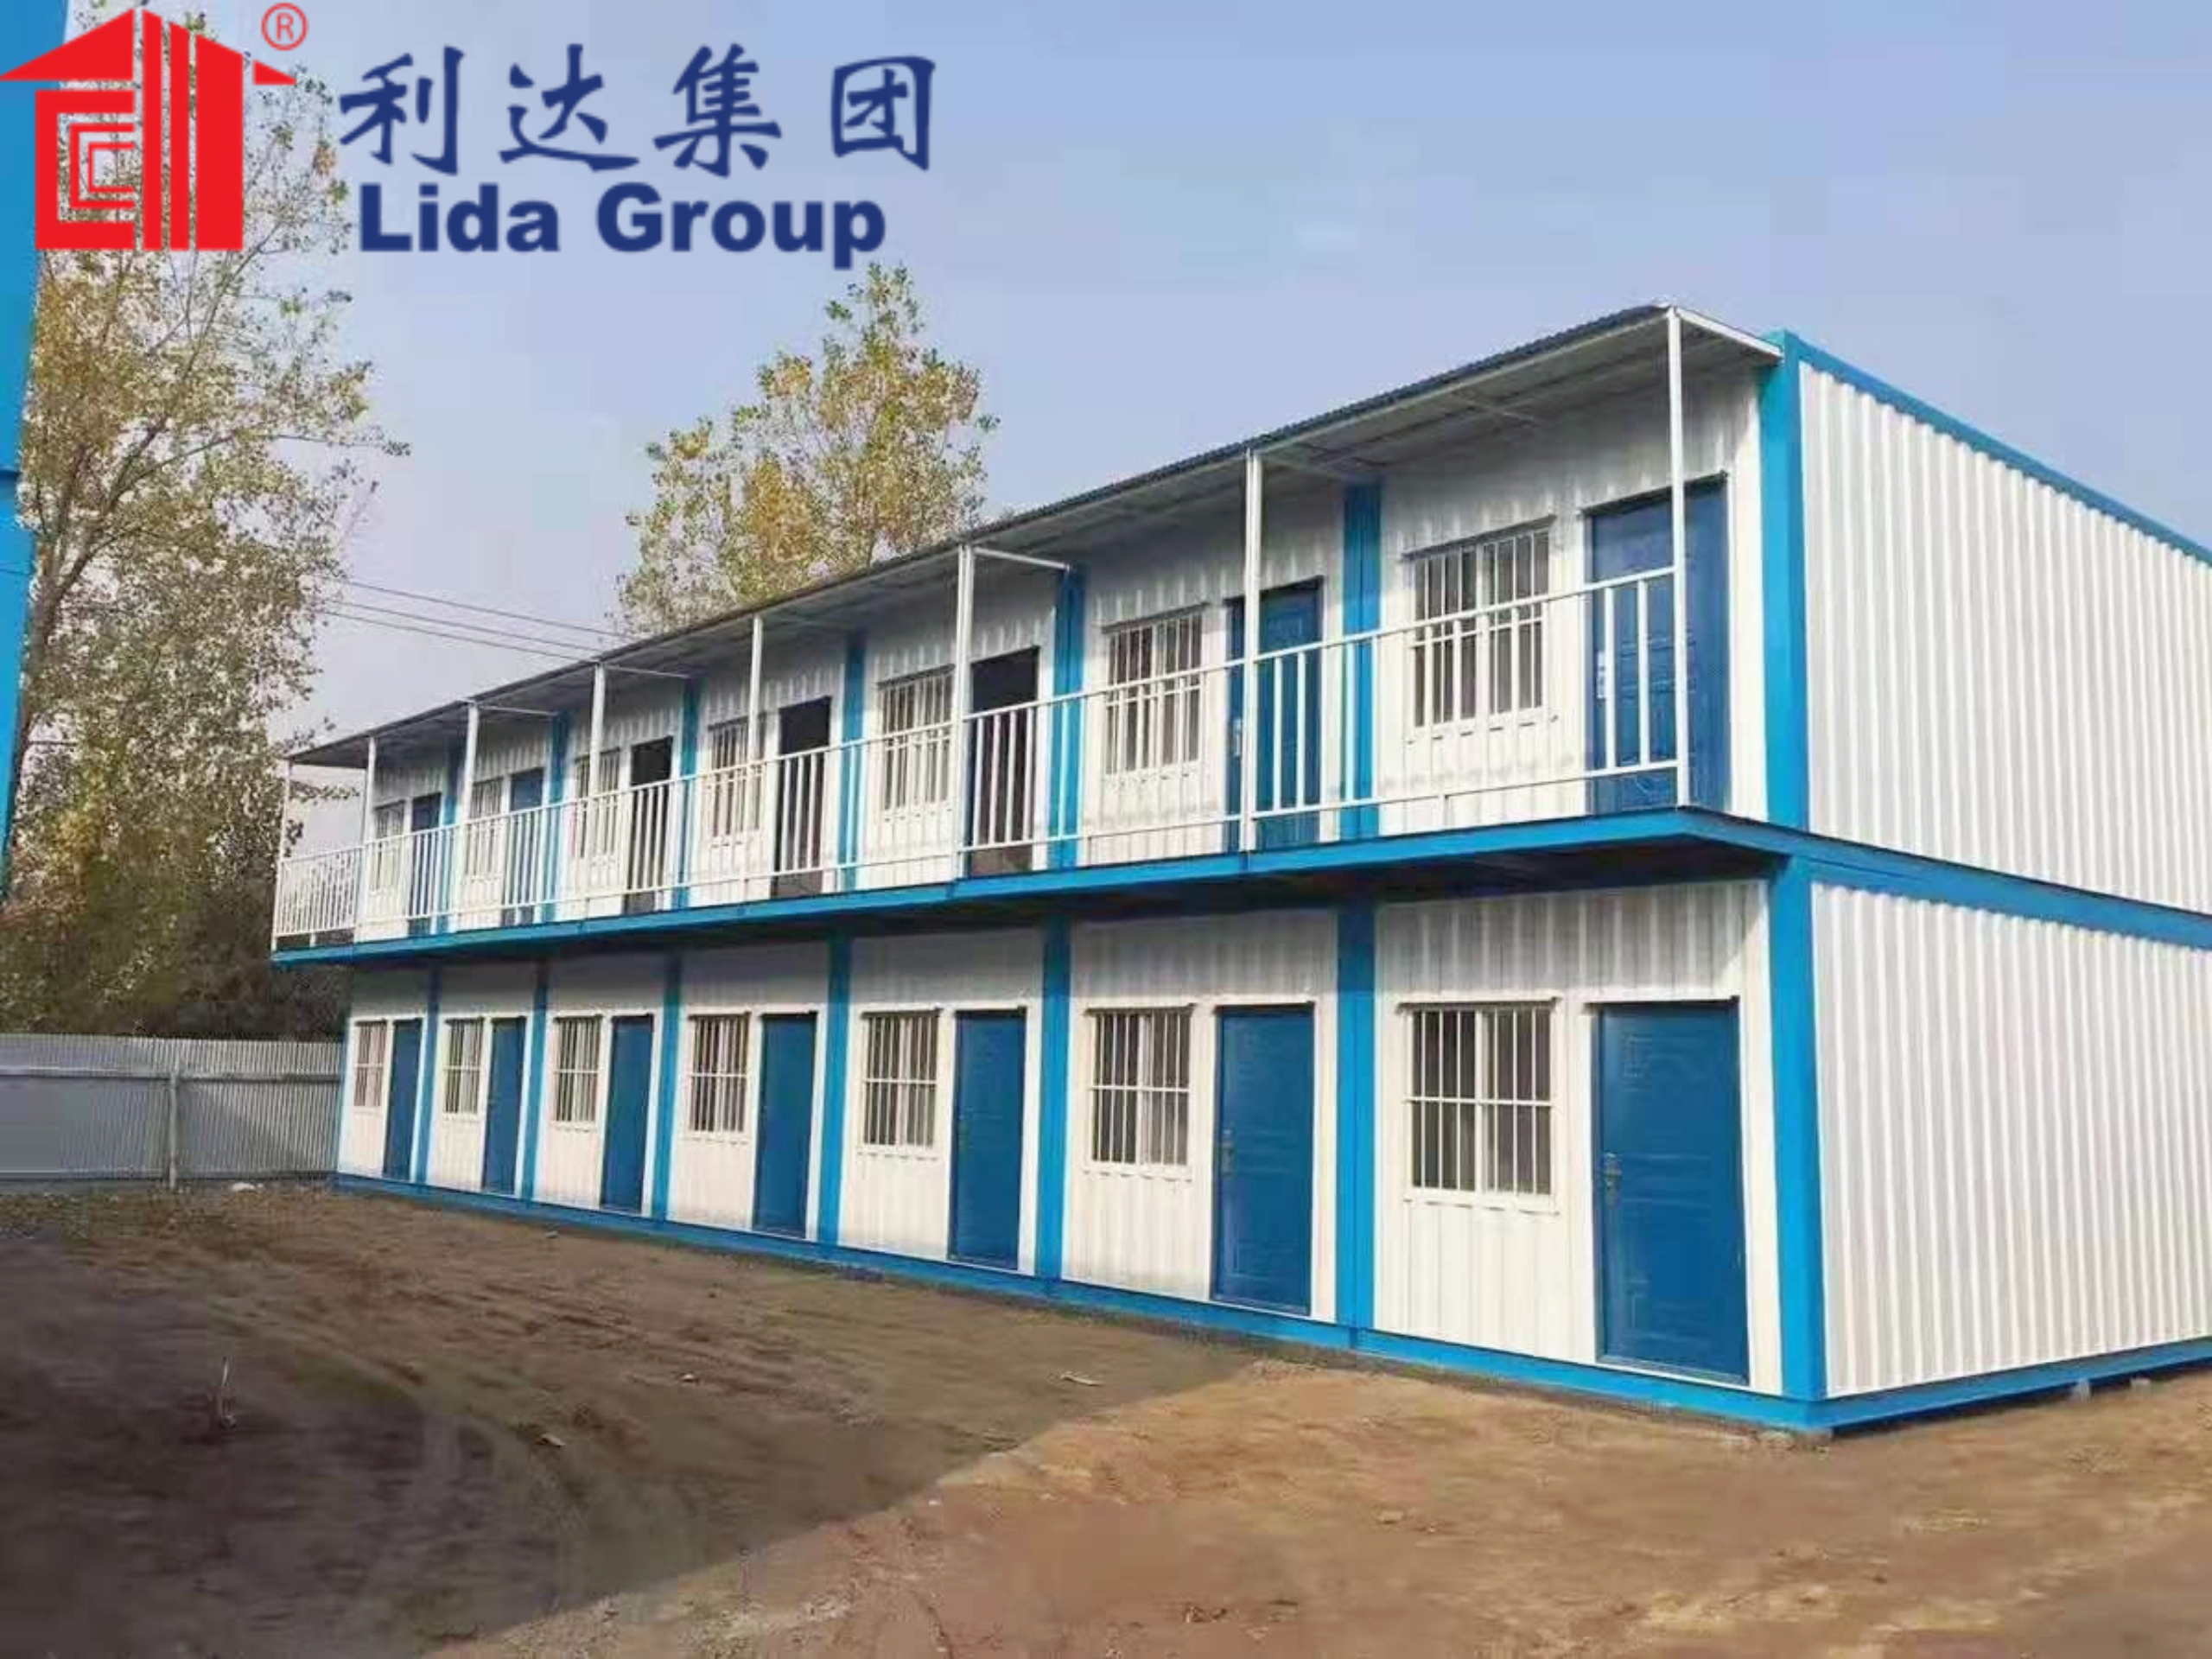 Architectural firm partners with Lida Group to design earthquake resistant modular container houses made from stacked steel shipping container modules that can be deployed anywhere in the world.